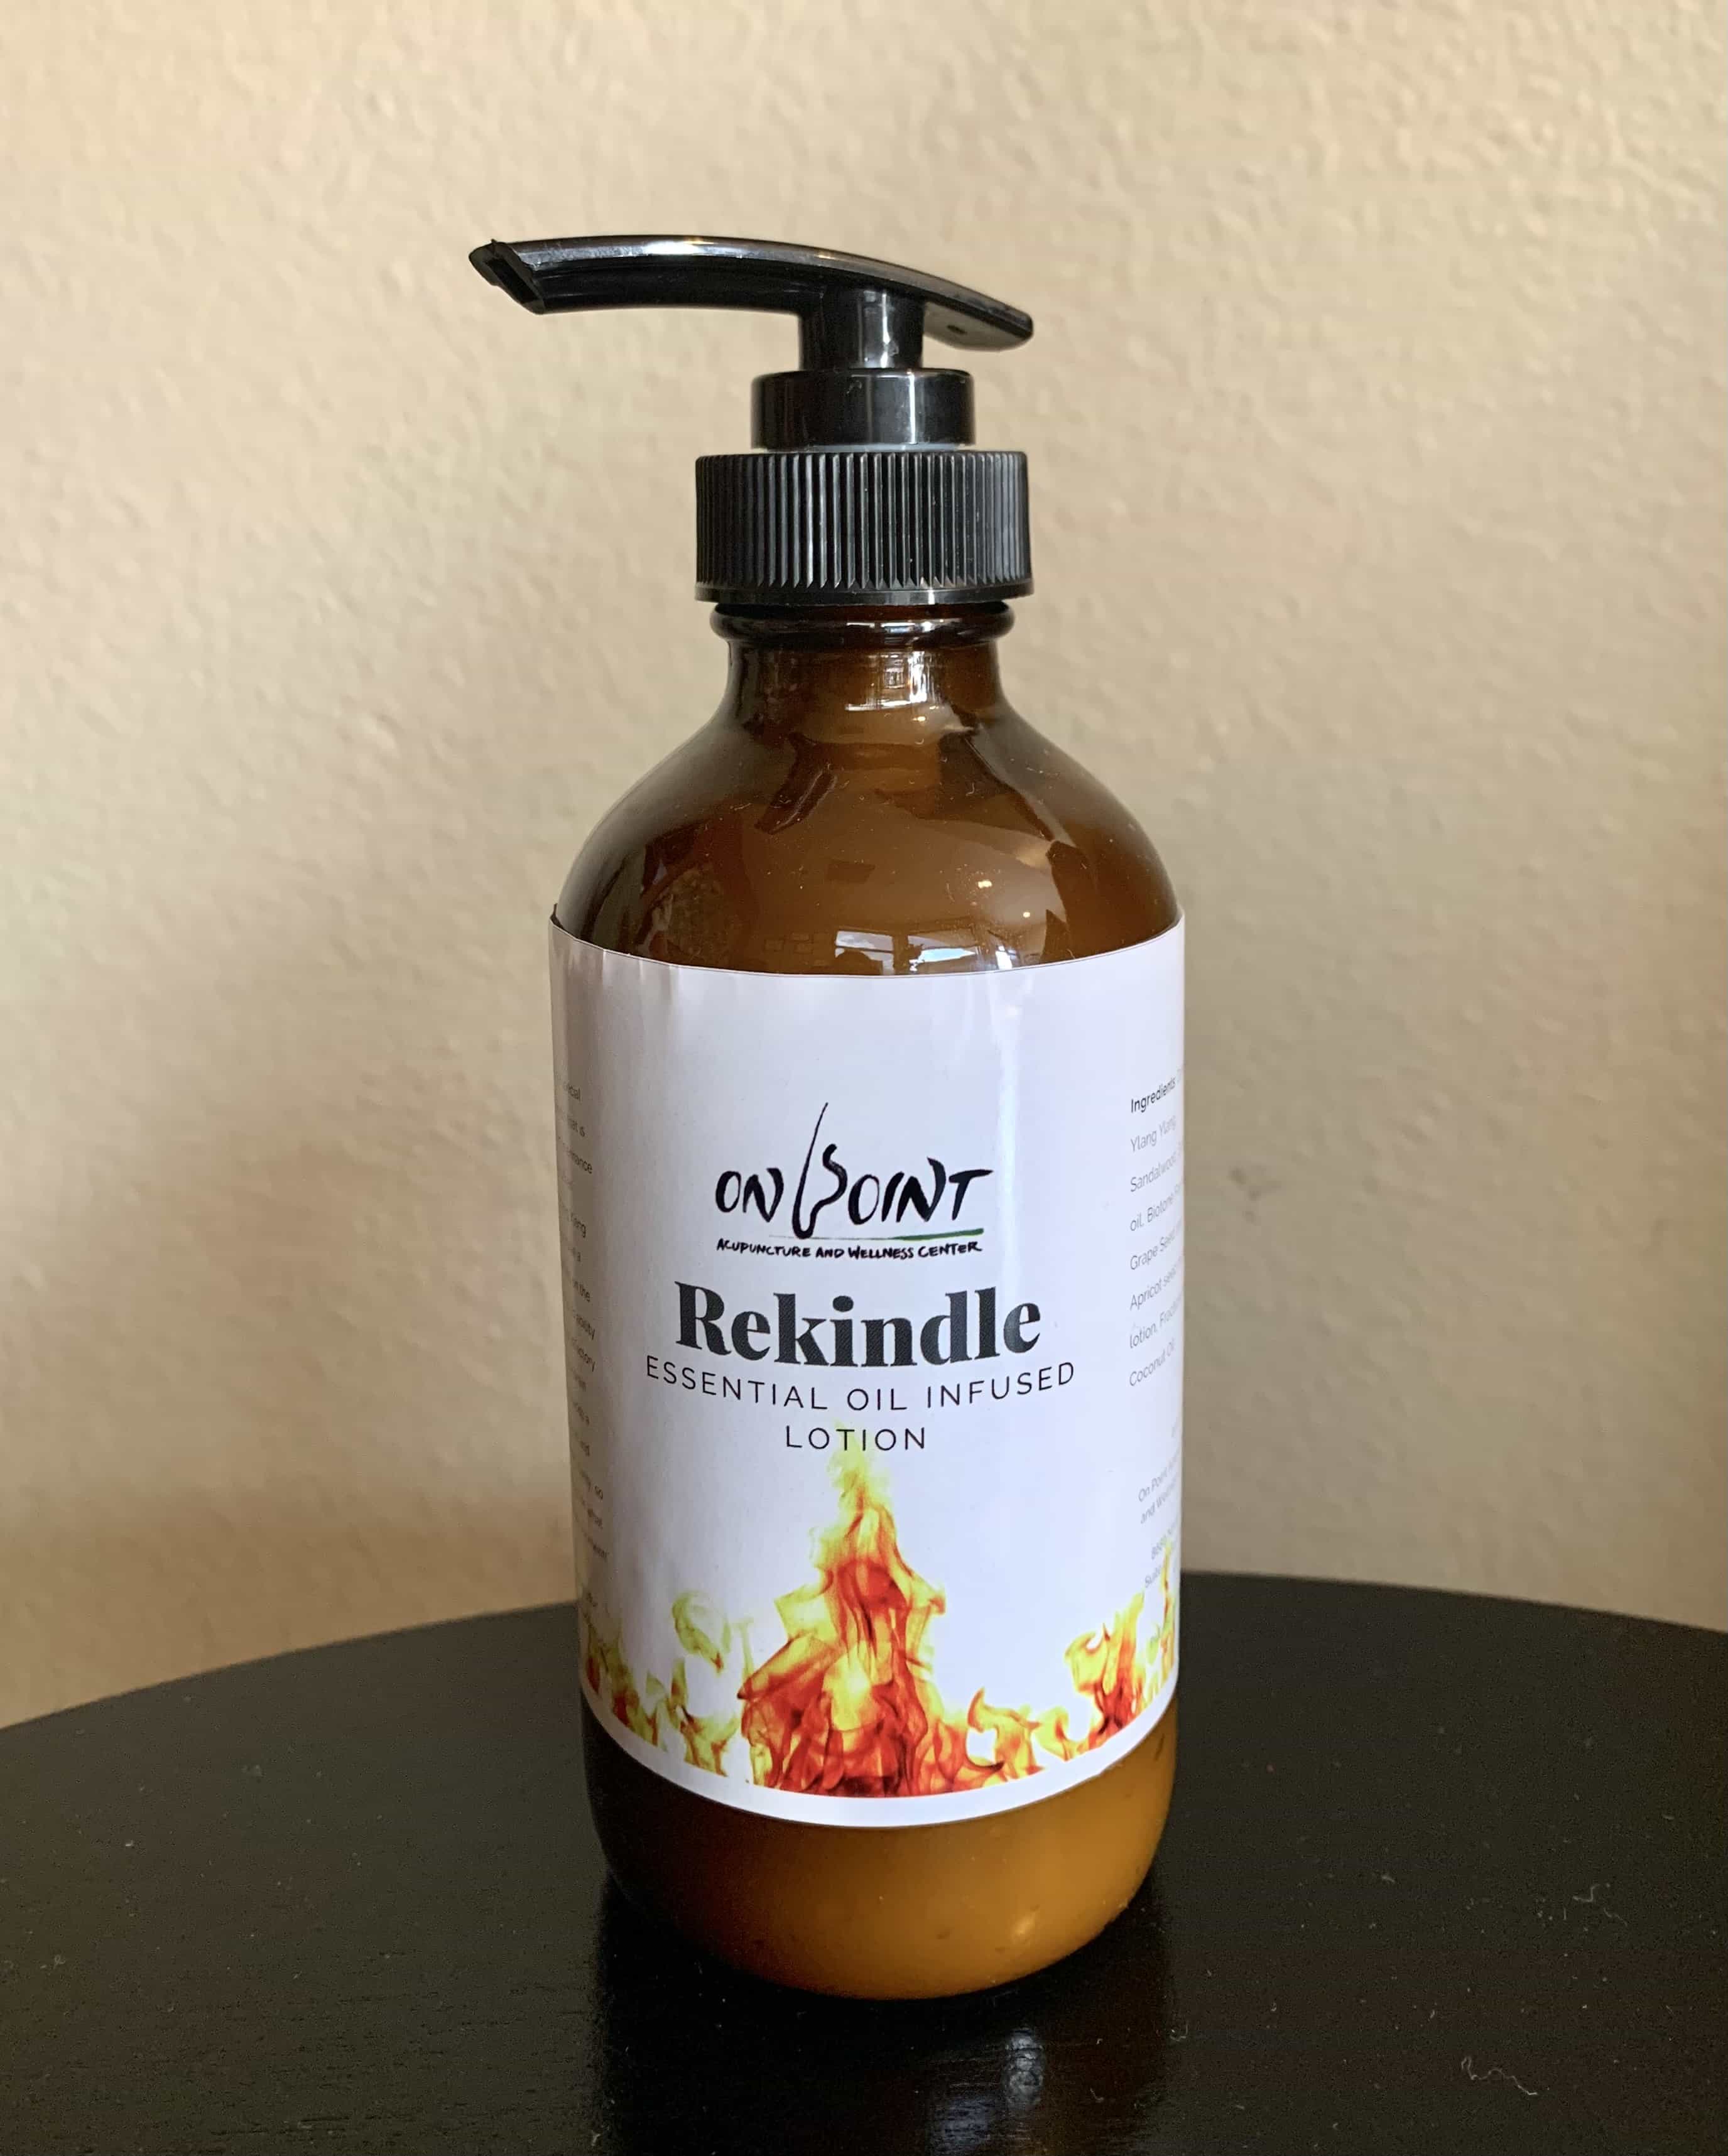 A photo of the Rekindle Essential Oil-infused Lotion from On Point